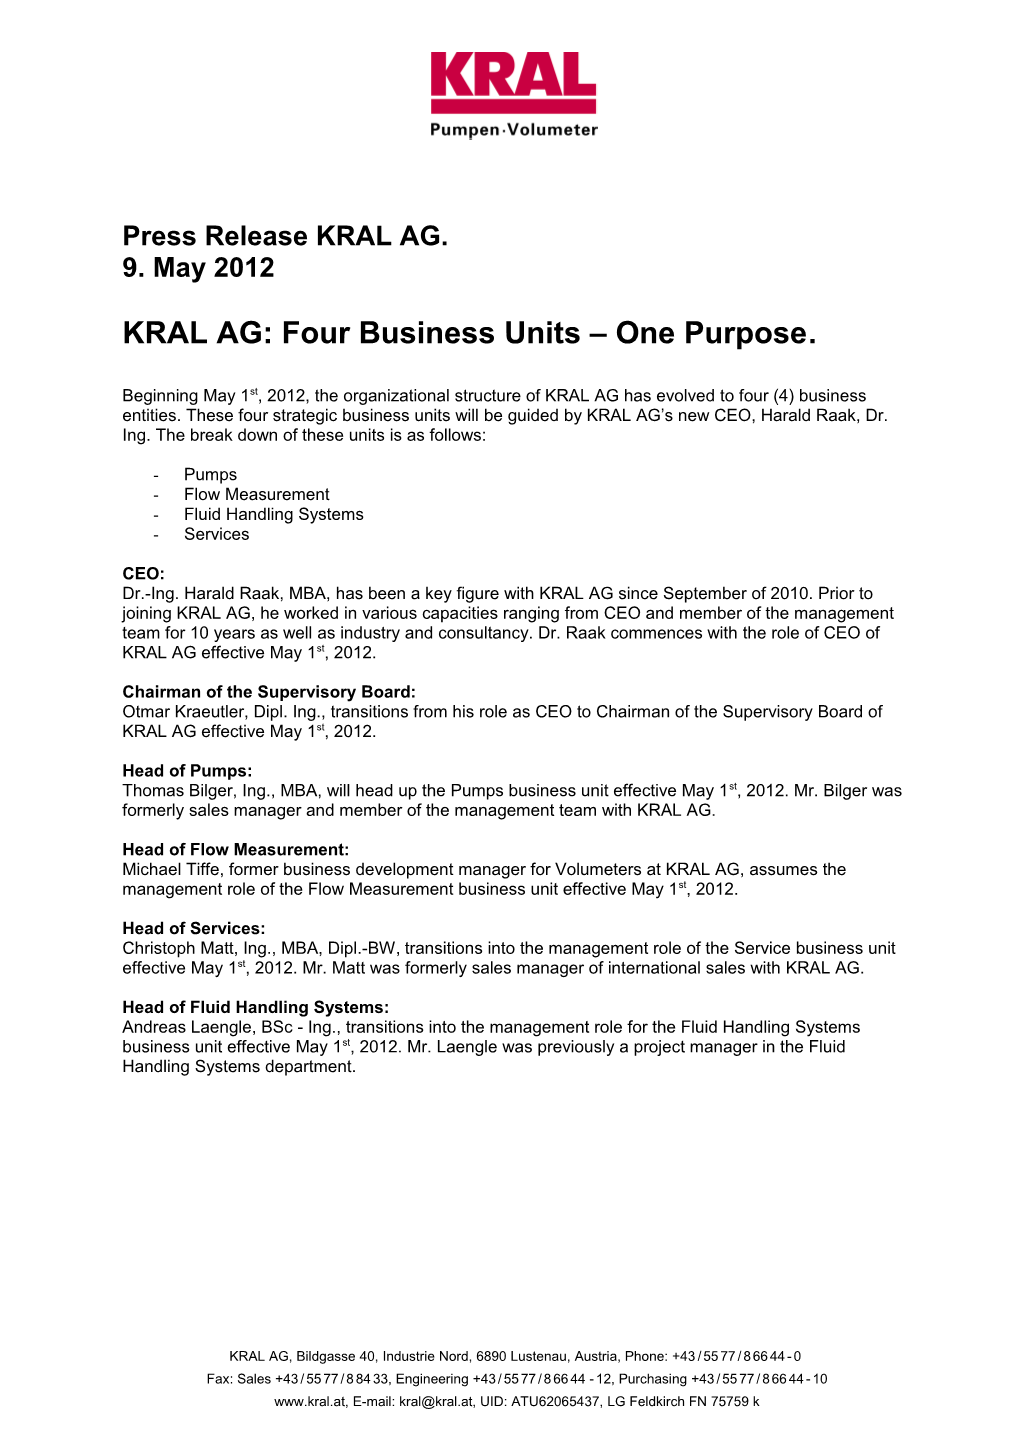 KRAL AG: Four Business Units One Purpose